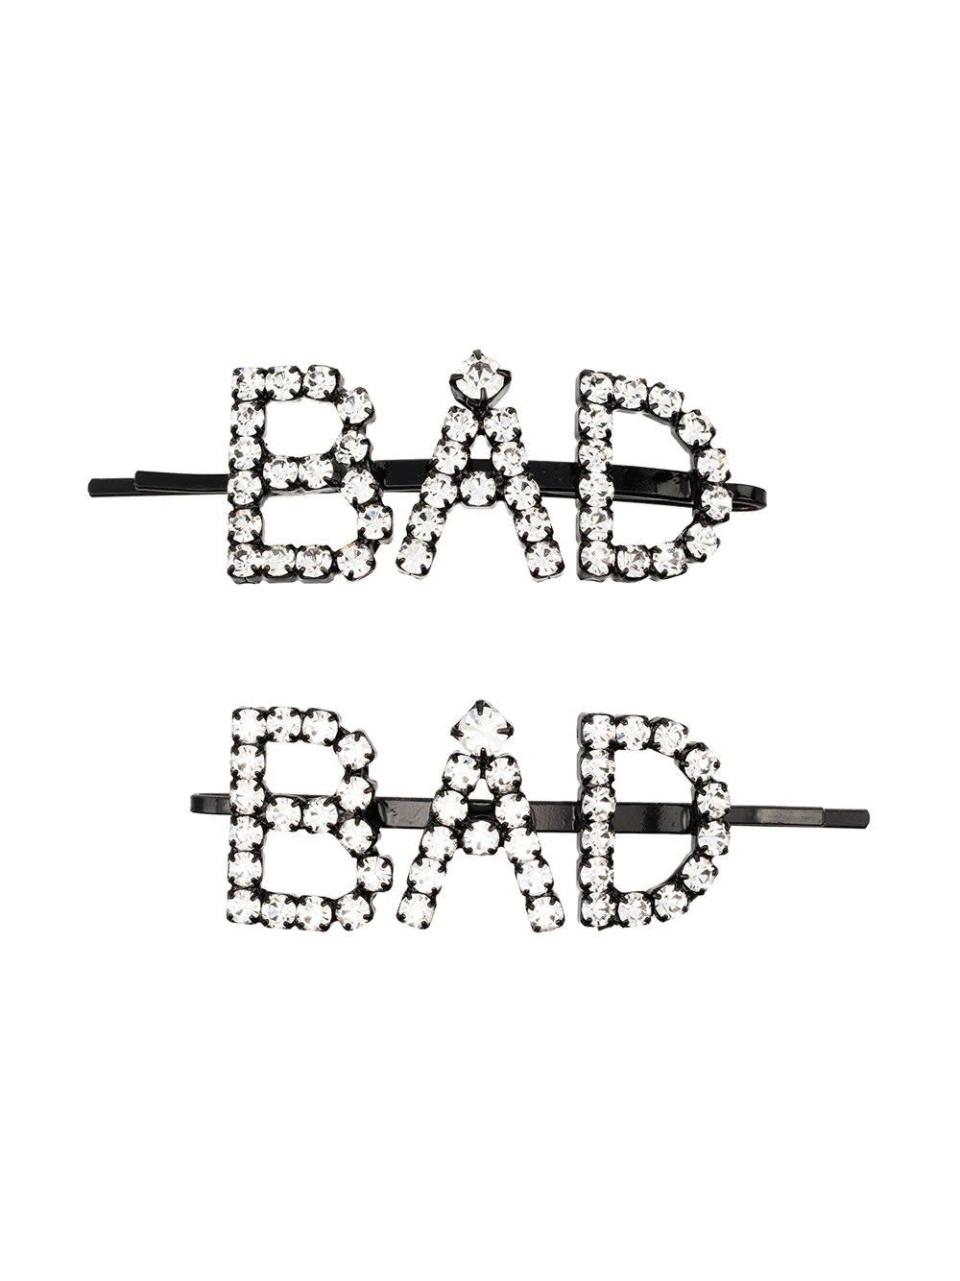 My feelings about 2019 in diamanté hair accessory form. Party! <br> <br><strong>Ashley Williams</strong> Crystal Bad Hair Slides, $, available at <a href="https://www.farfetch.com/uk/shopping/women/ashley-williams-crystal-bad-hair-slides-item-14147780.aspx" rel="nofollow noopener" target="_blank" data-ylk="slk:Farfetch" class="link ">Farfetch</a>